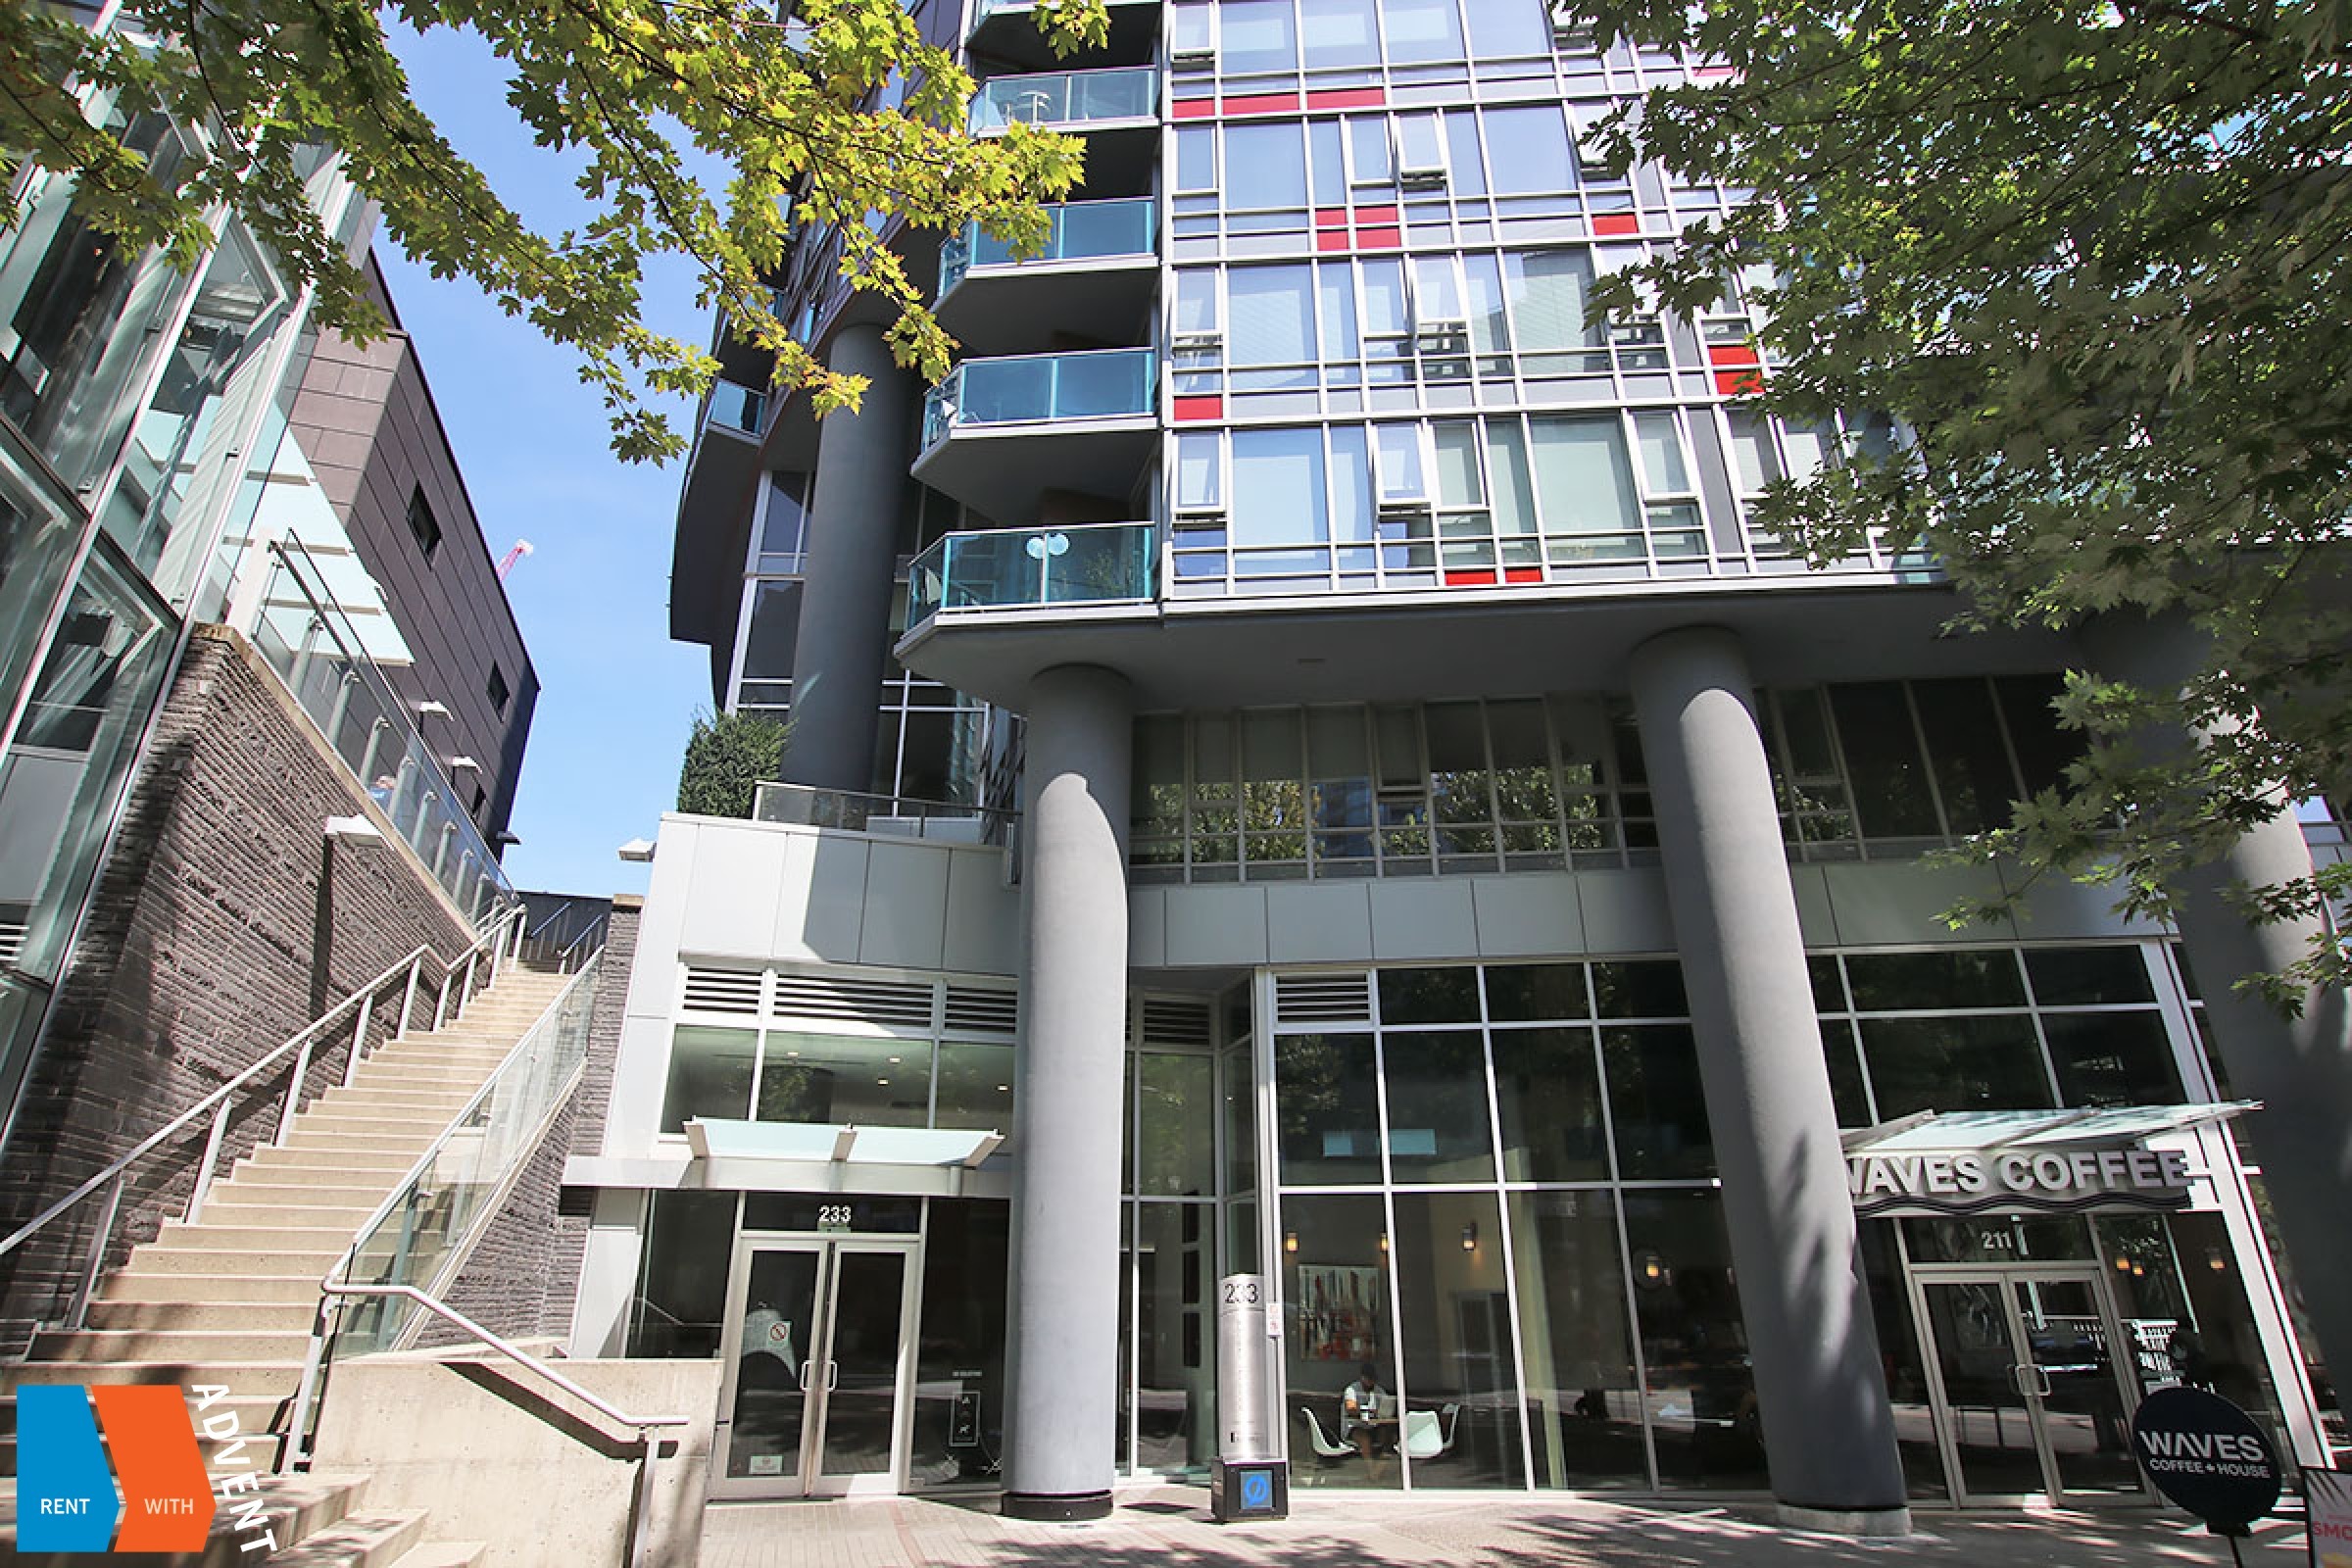 Fully Furnished 6th Floor 1 Bedroom Apartment Rental at TV Towers in Yaletown. 609 - 233 Robson Street, Vancouver, BC, Canada.